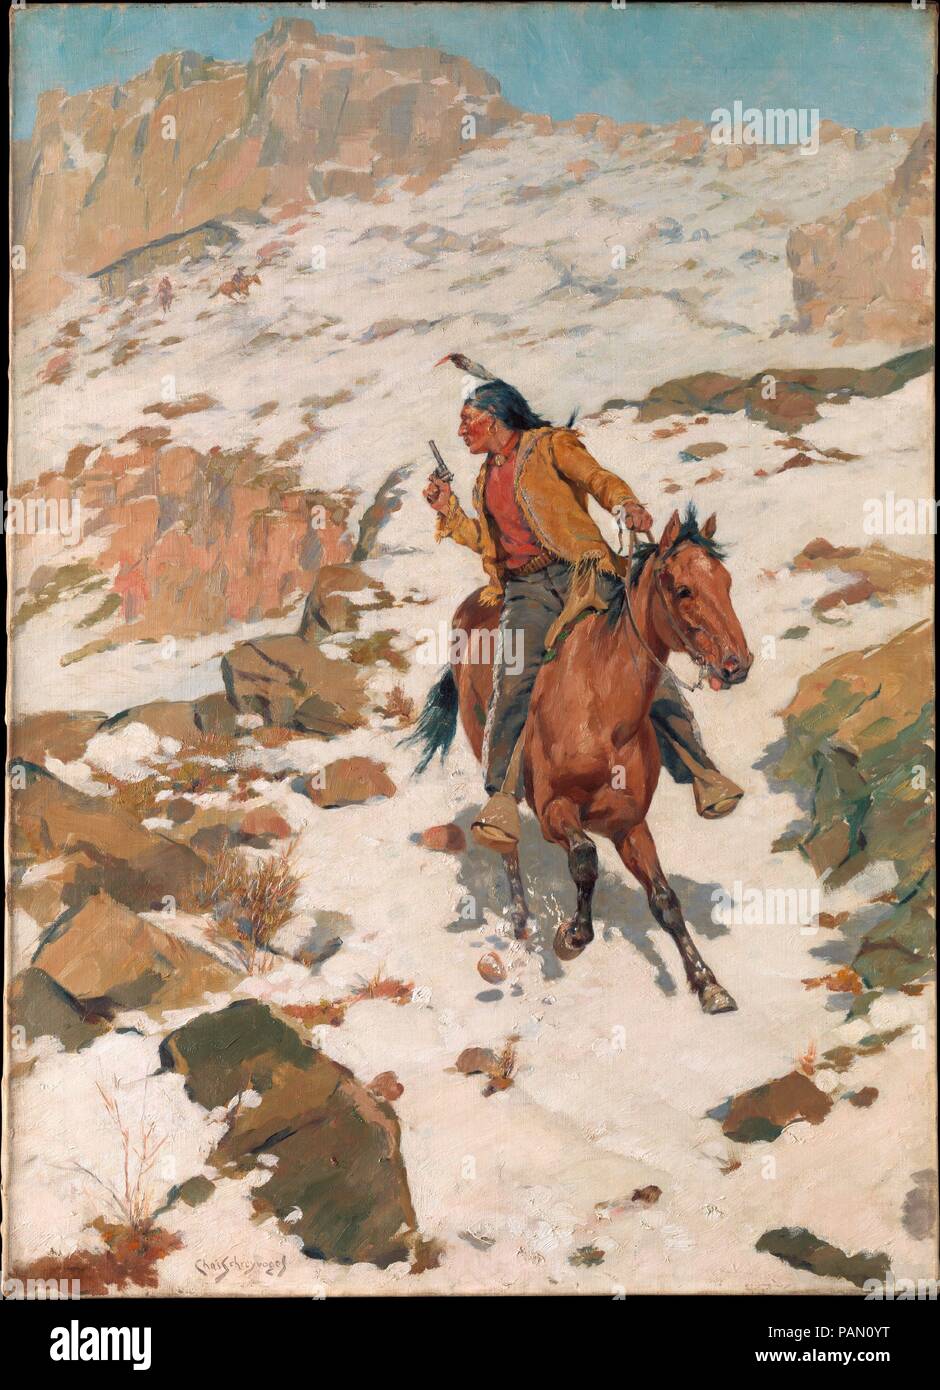 In Hot Pursuit. Artist: Charles Schreyvogel (1861-1912). Dimensions: 34 1/8 x 24 3/4in. (86.7 x 62.9cm)  Framed: 39 3/8 x 29 15/16 x 2 3/4 in. (100 x 76 x 7 cm). Date: After 1900.  This work depicts an armed American Indian on a galloping horse being pursued down a rough mountainside by several riders, who are barely visible in the distance. The instantaneous, snapshotlike view and the fact that the Indian and his mount appear to be on the verge of plunging into the viewer's space amplify the drama. To capture naturalistic effects, Schreyvogel often painted outdoors, studying his models in day Stock Photo